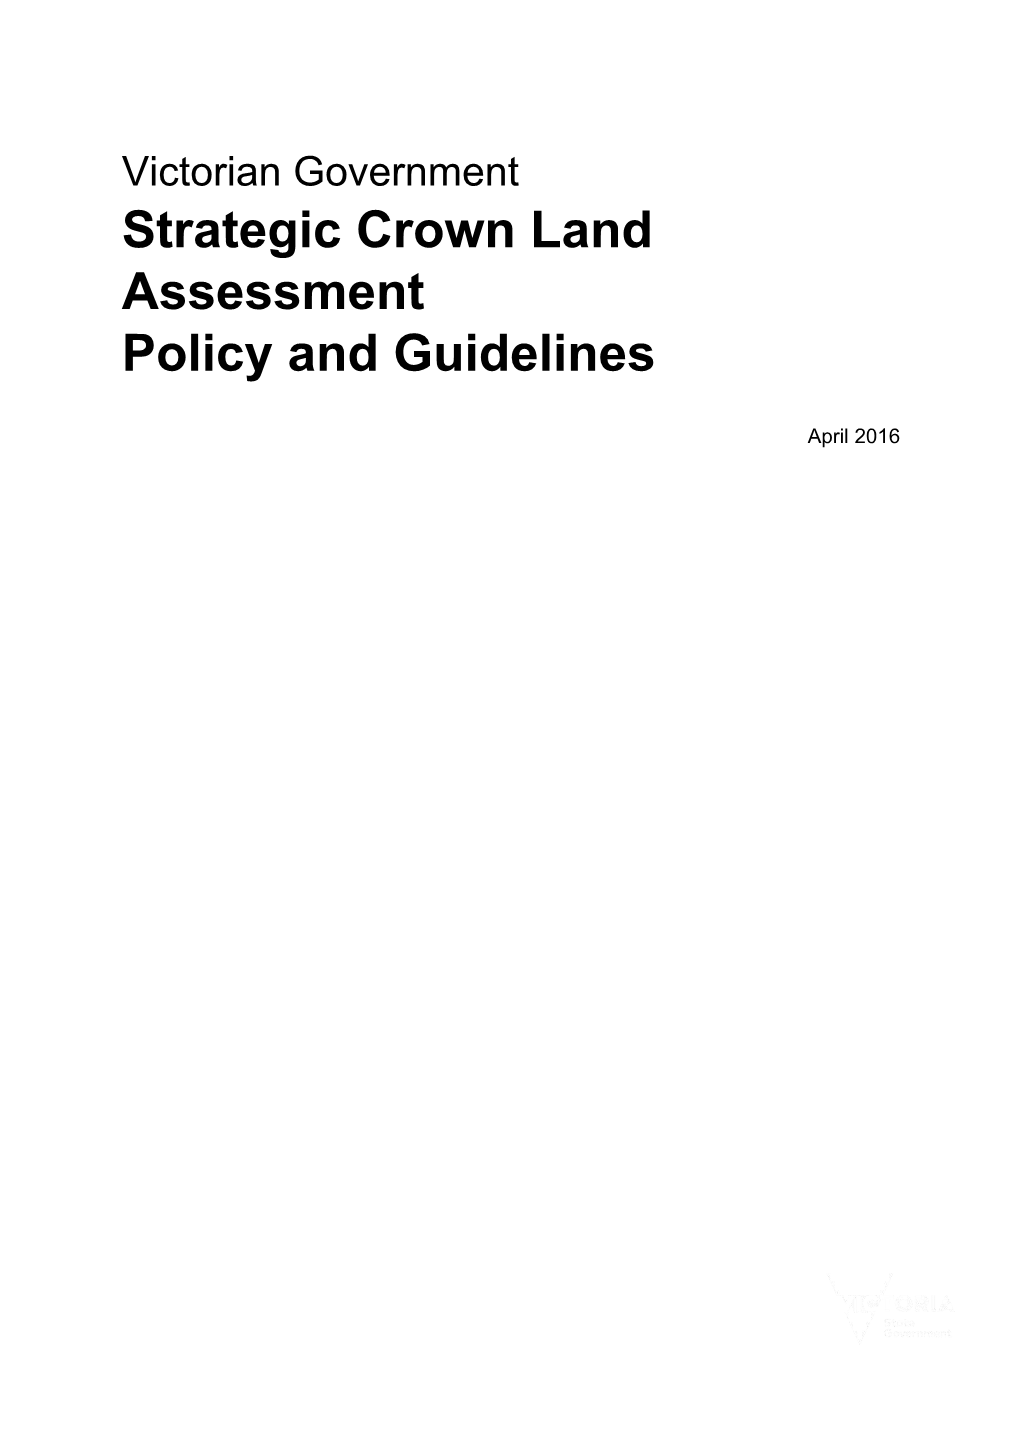 Victorian Government Strategic Crown Land Assessment Policy and Guidelines